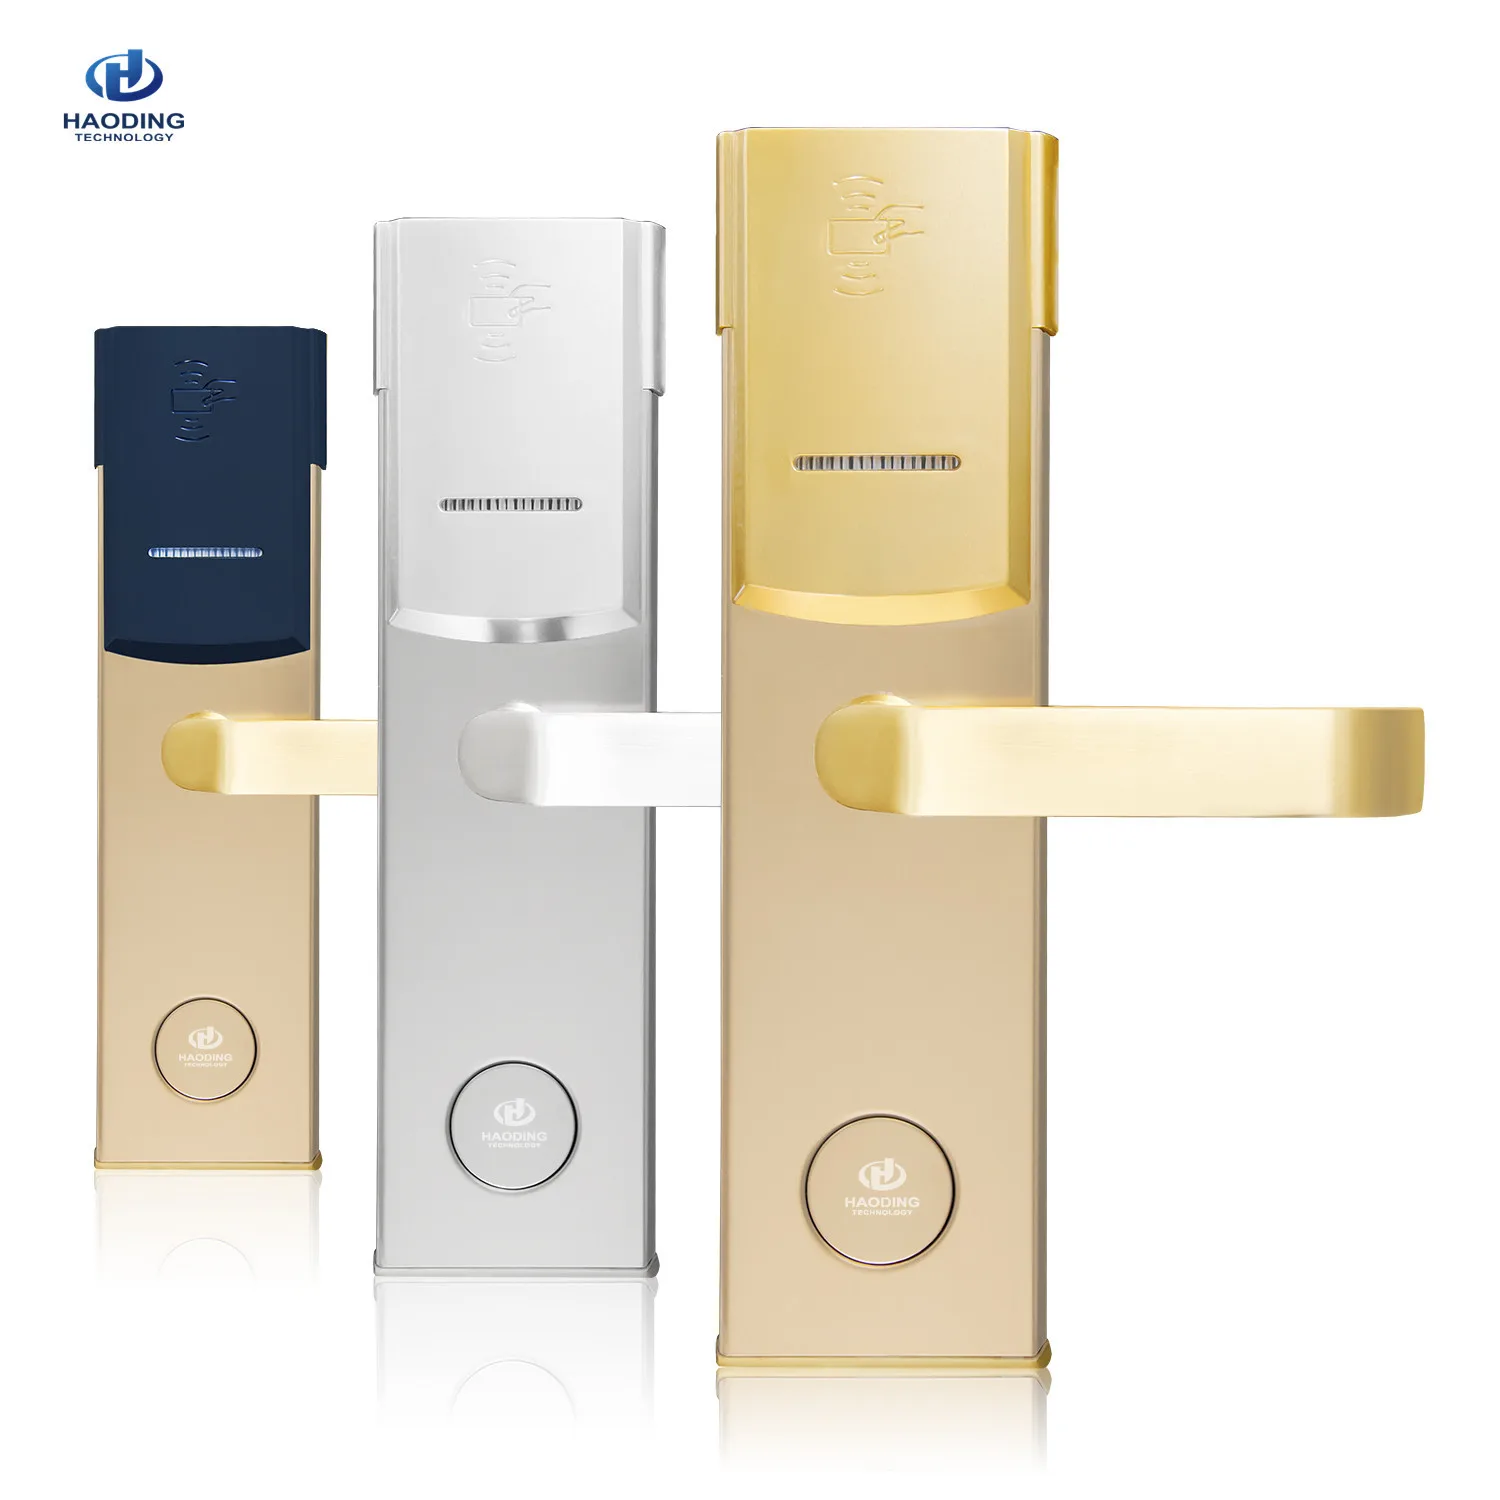 stainless steel smart hotel rifd lock keycard door lock system with api